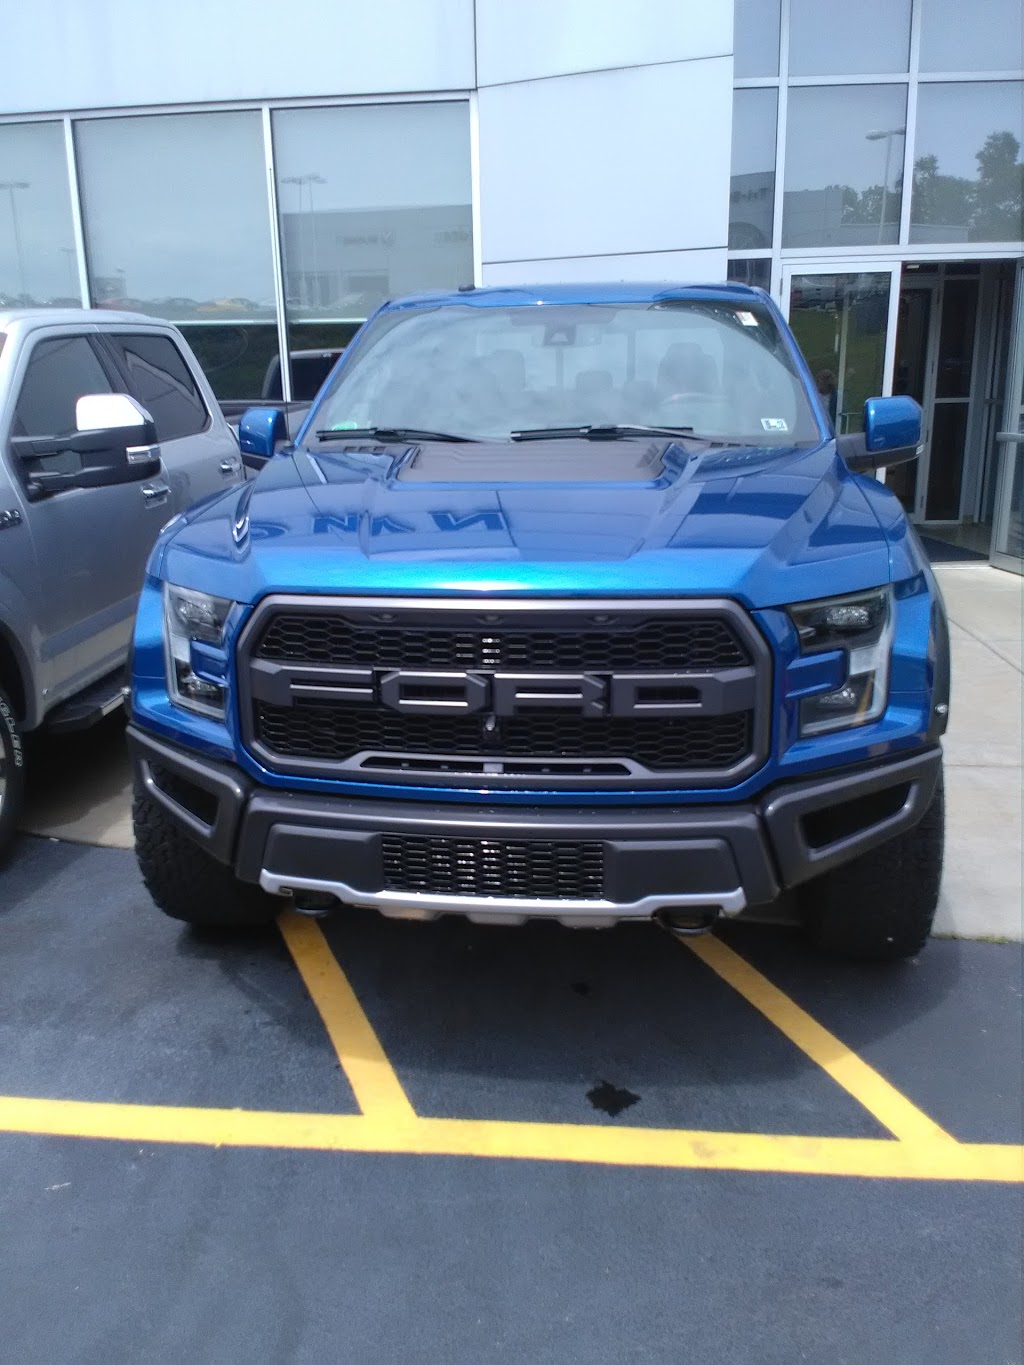 Ford of Uniontown | 1 Superior Way, Uniontown, PA 15401, USA | Phone: (724) 425-5980